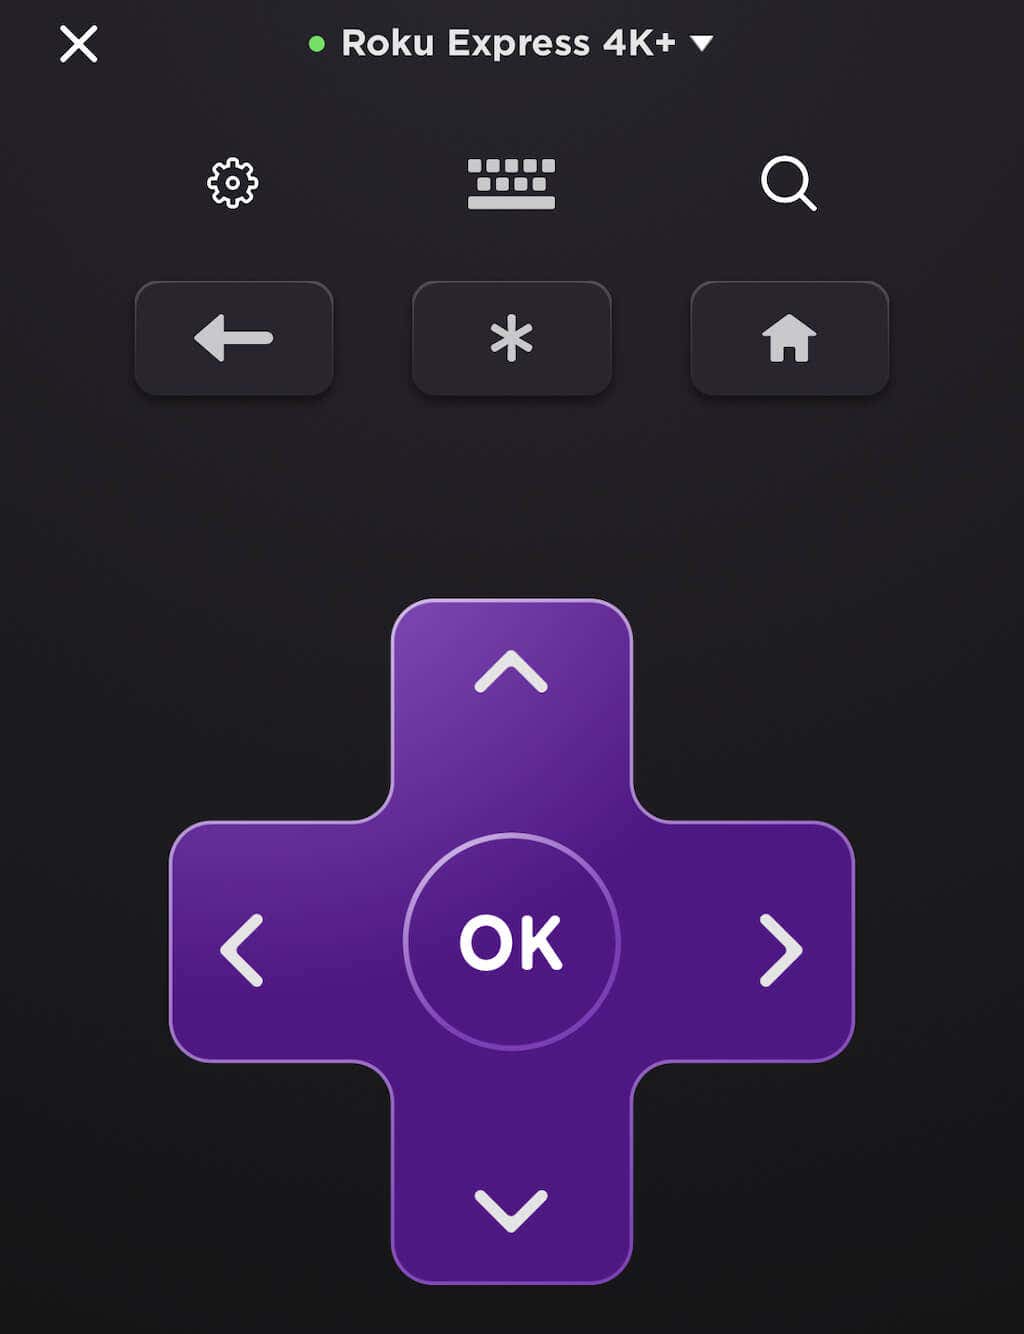 How to connect Roku to WiFi without a remote